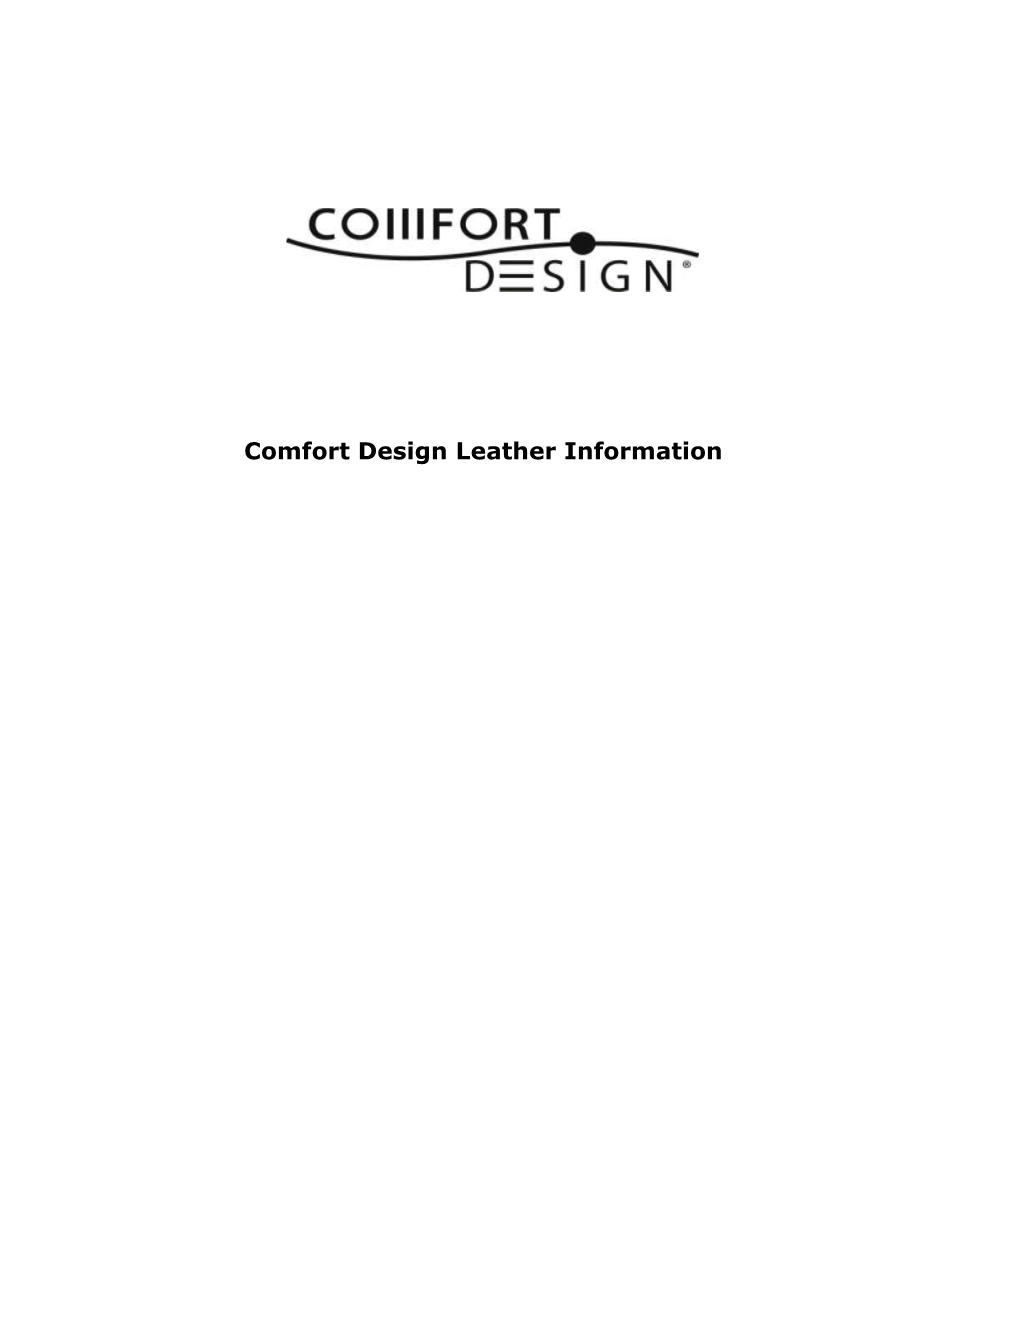 Comfort Design Leather Information the NATURAL CHARACTERISTICS of QUALITY LEATHER